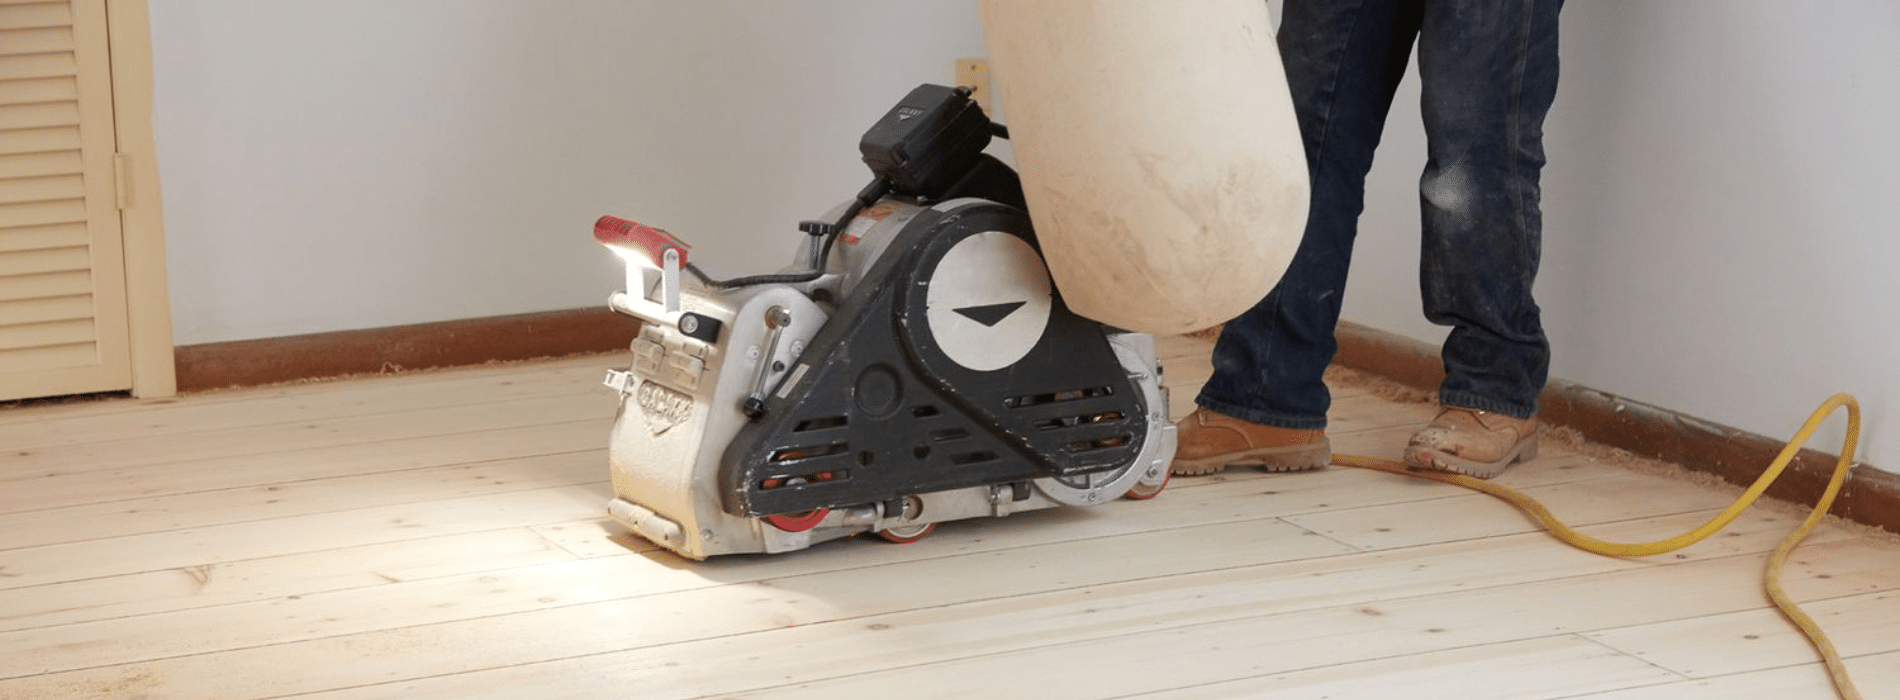 Mr Sander® using a Bona Scorpion, a 200mm drum sander, are sanding a parquet floor in Greater London (South East). With 1.5kW power, 240V voltage, and 50Hz frequency, they ensure clean and efficient results. The sander is connected to a dust extraction system equipped with a HEPA filter.